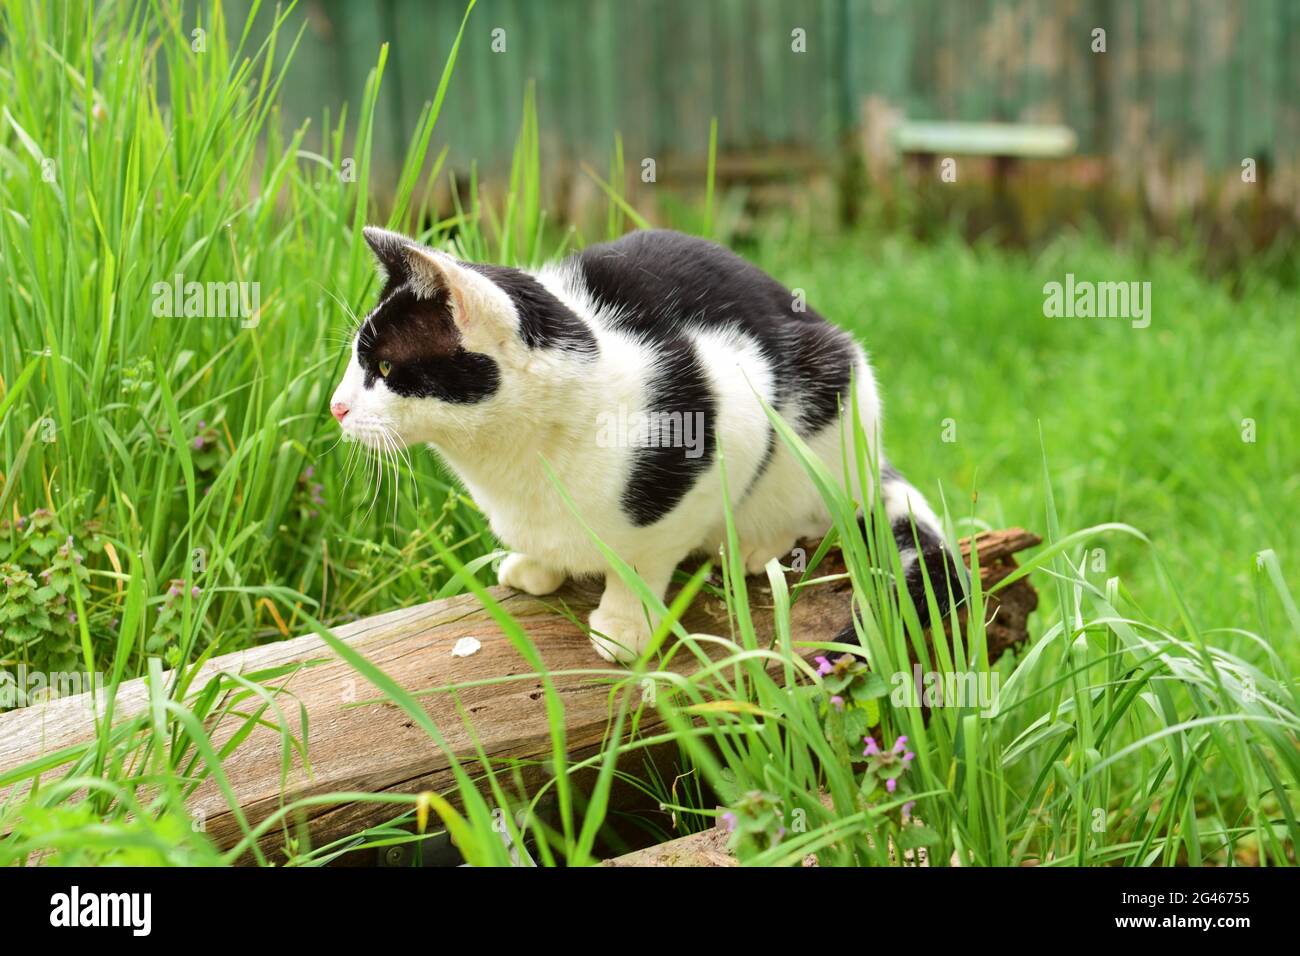 A black and white colored cat sitting on a wooden board between green grasses Stock Photo